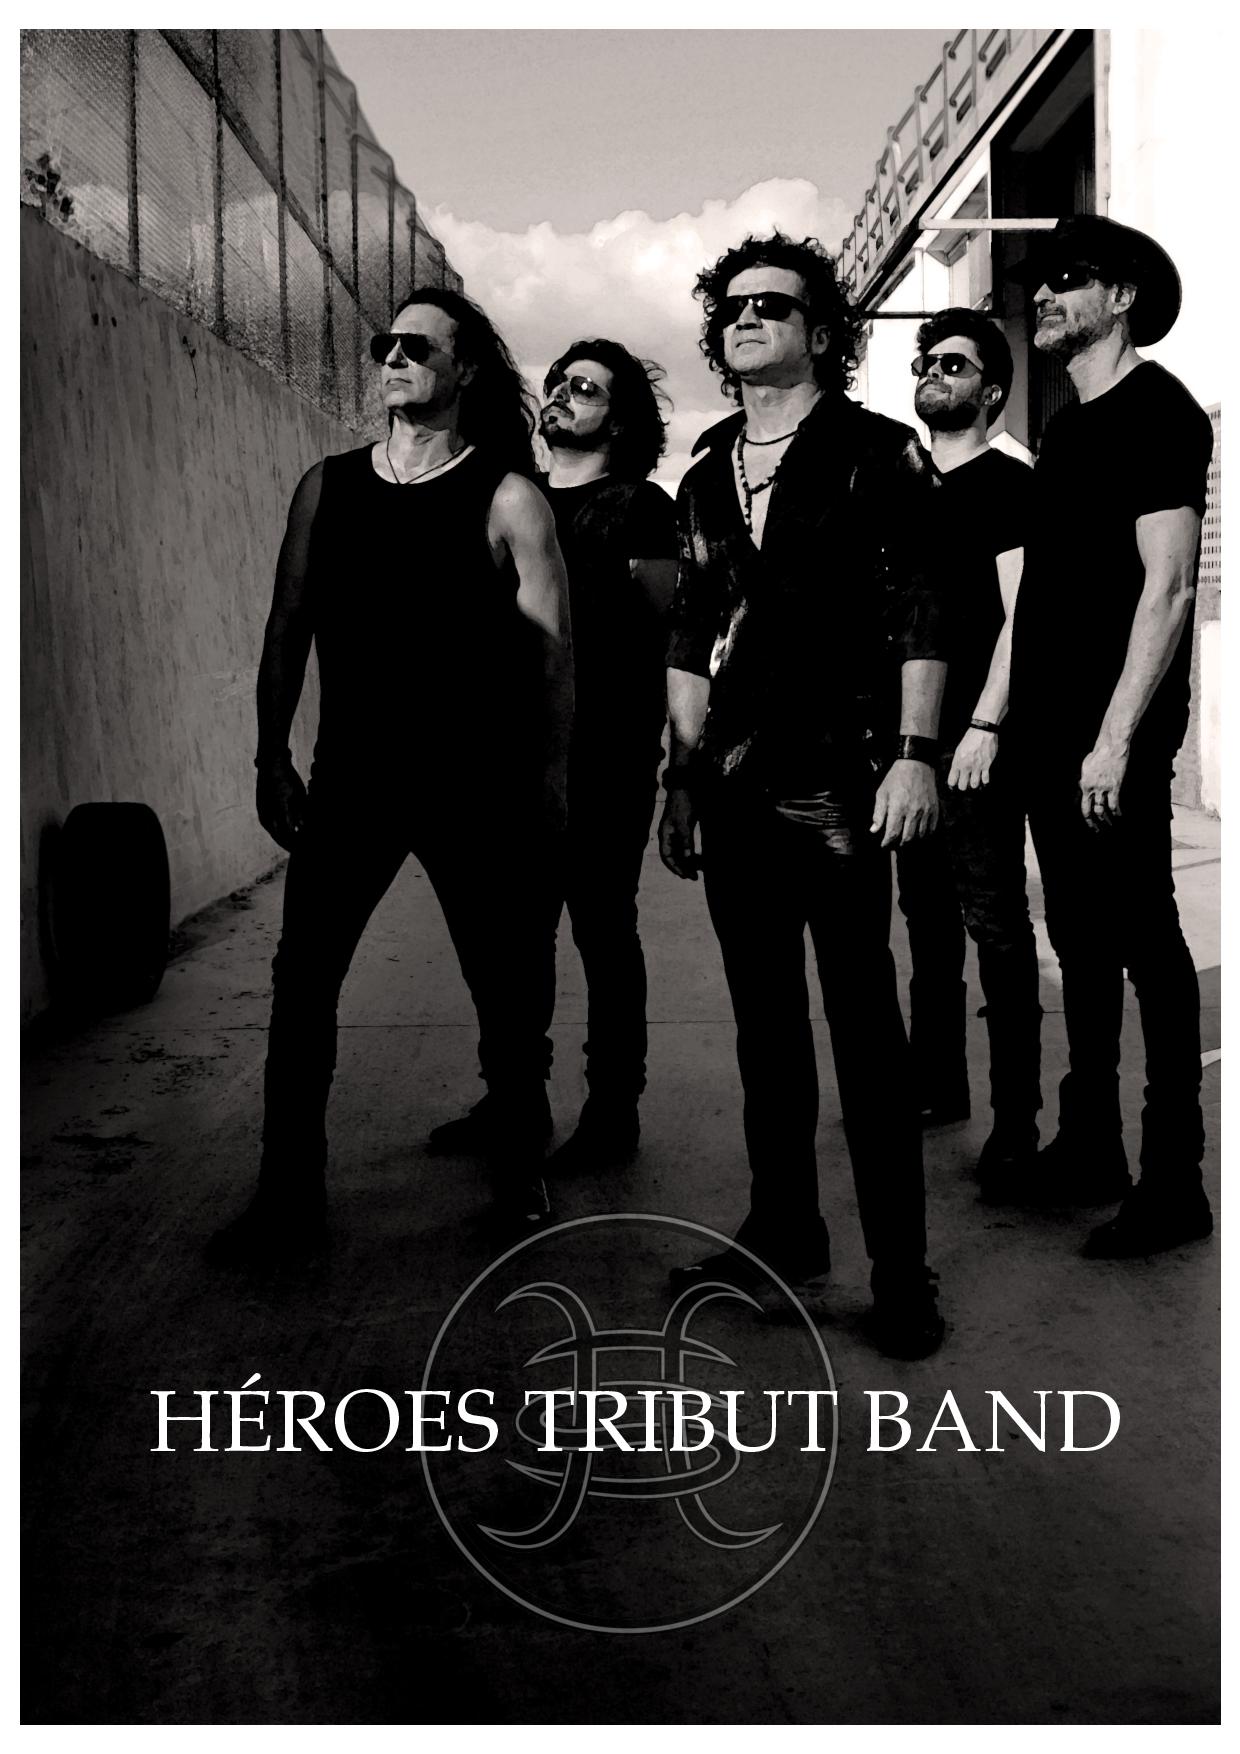 HÉROES TRIBUT BAND